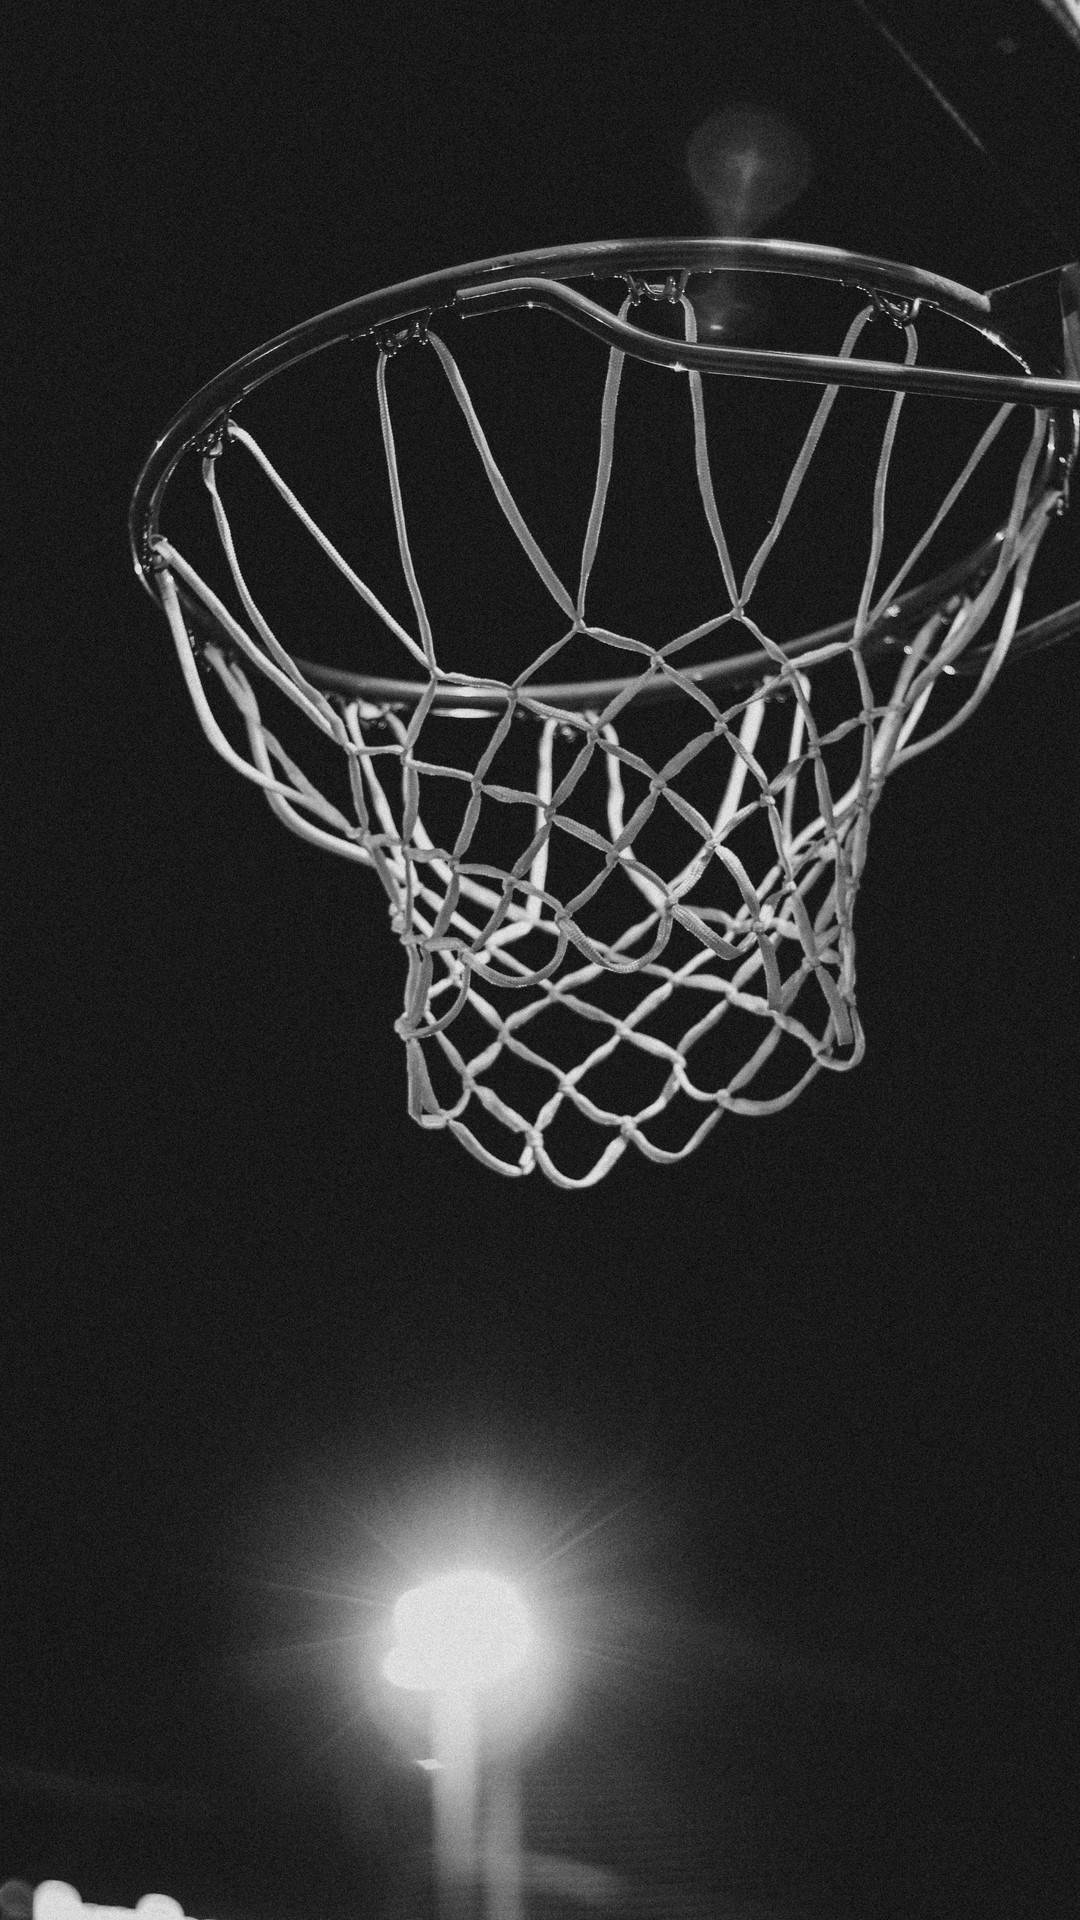 Aesthetic Basketball Ring Cool Basketball Iphone Background